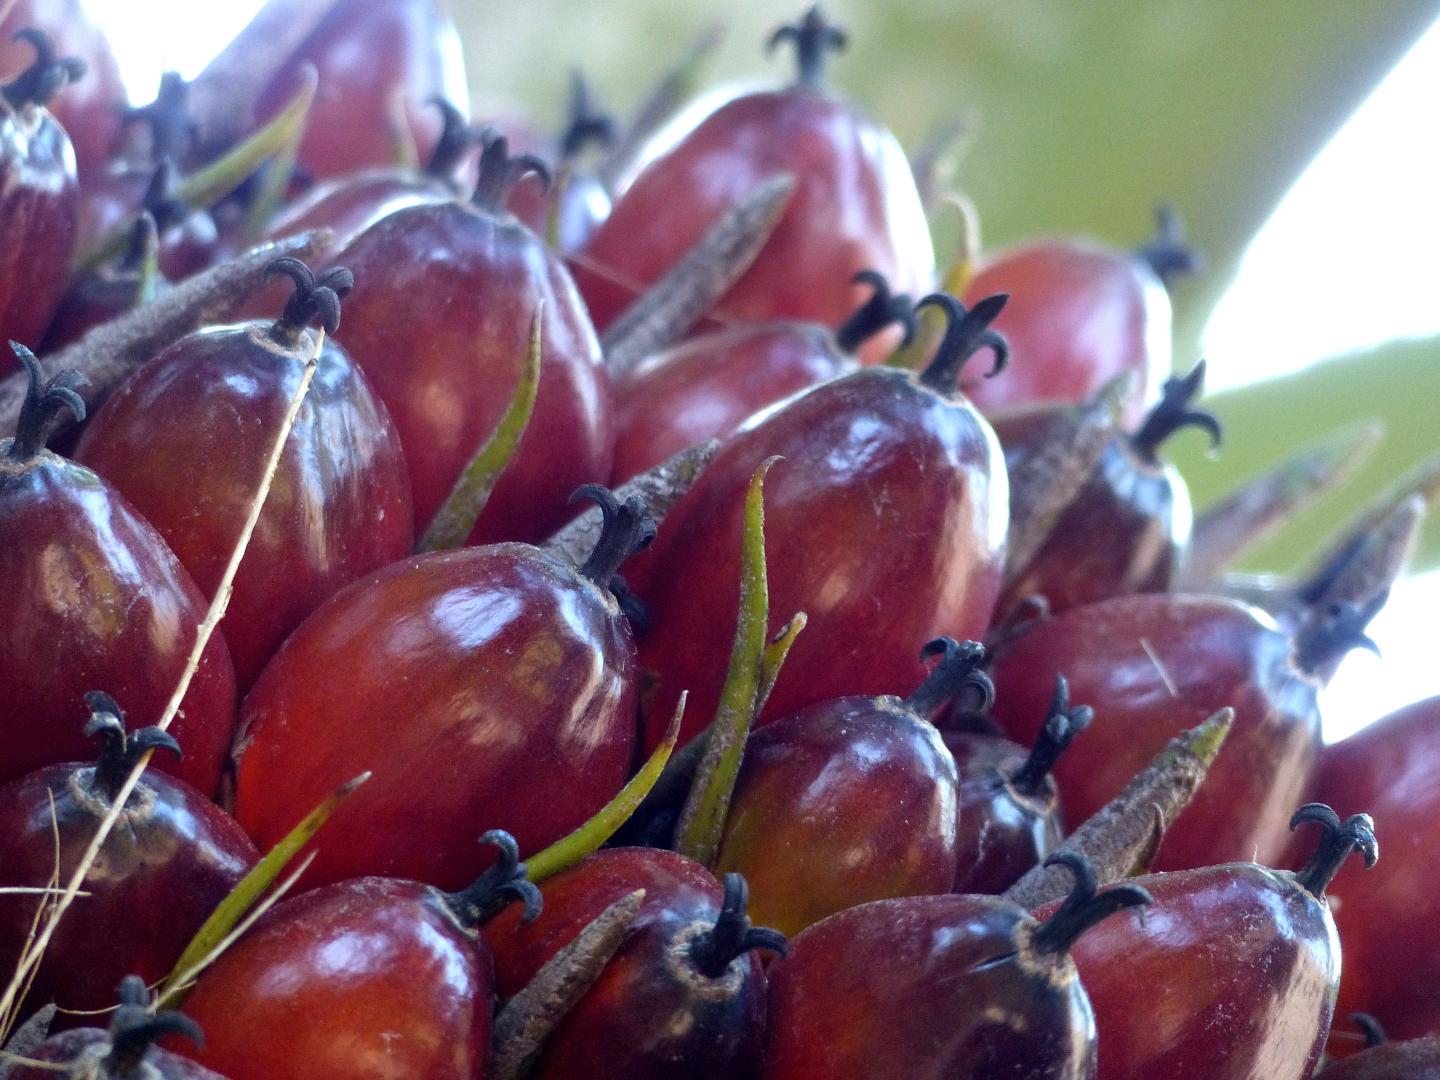 Close-up of oil palm fruit bunch